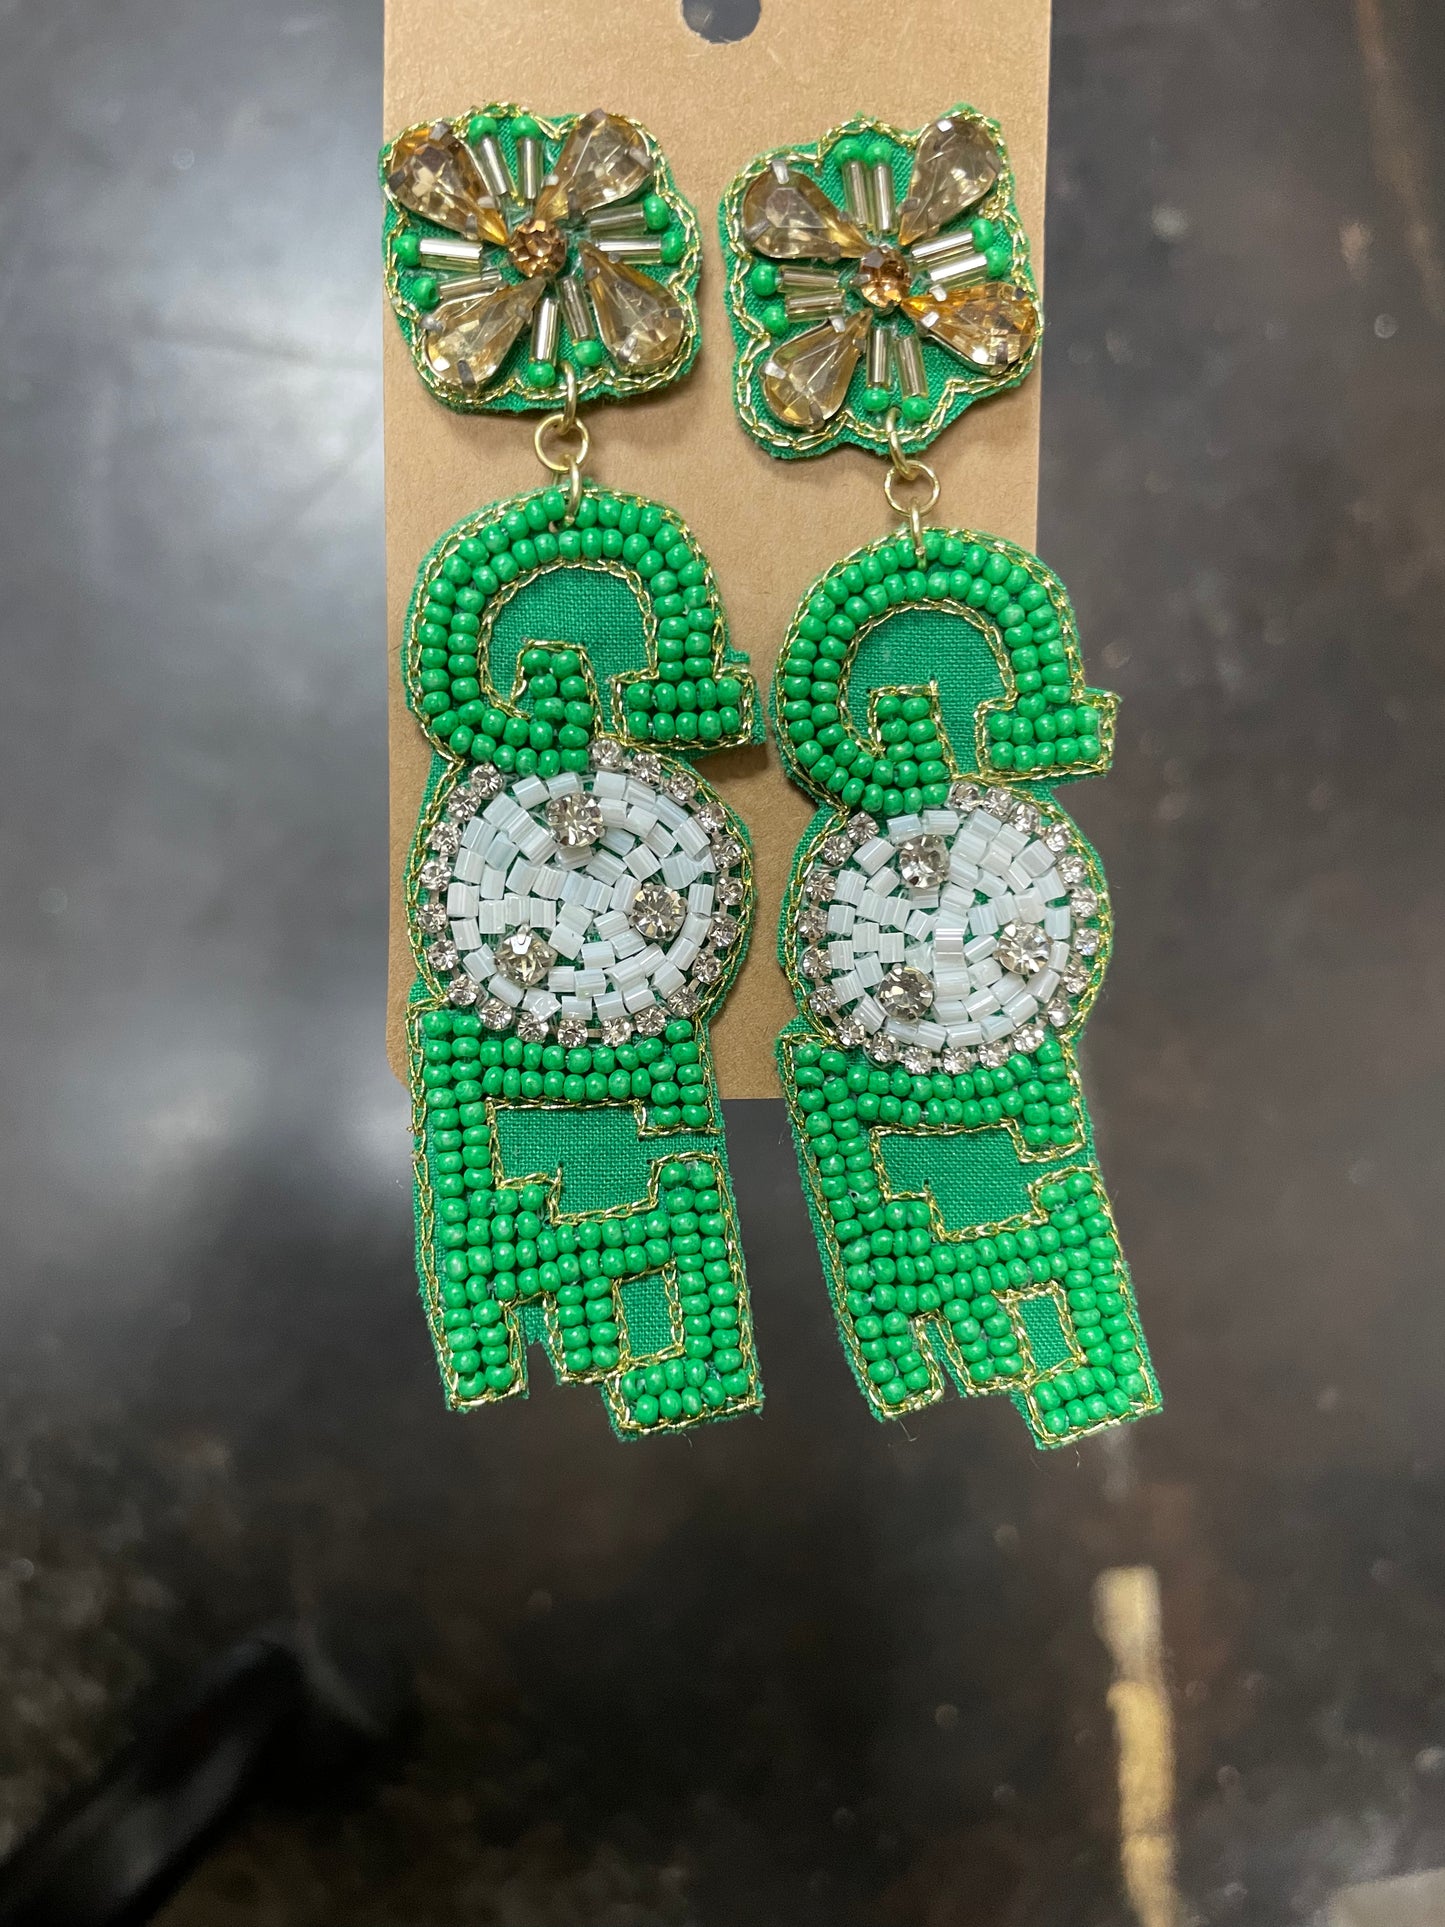 Beaded dangle earrings with jewel flower stud featuring "GOLF" in green and white beading.